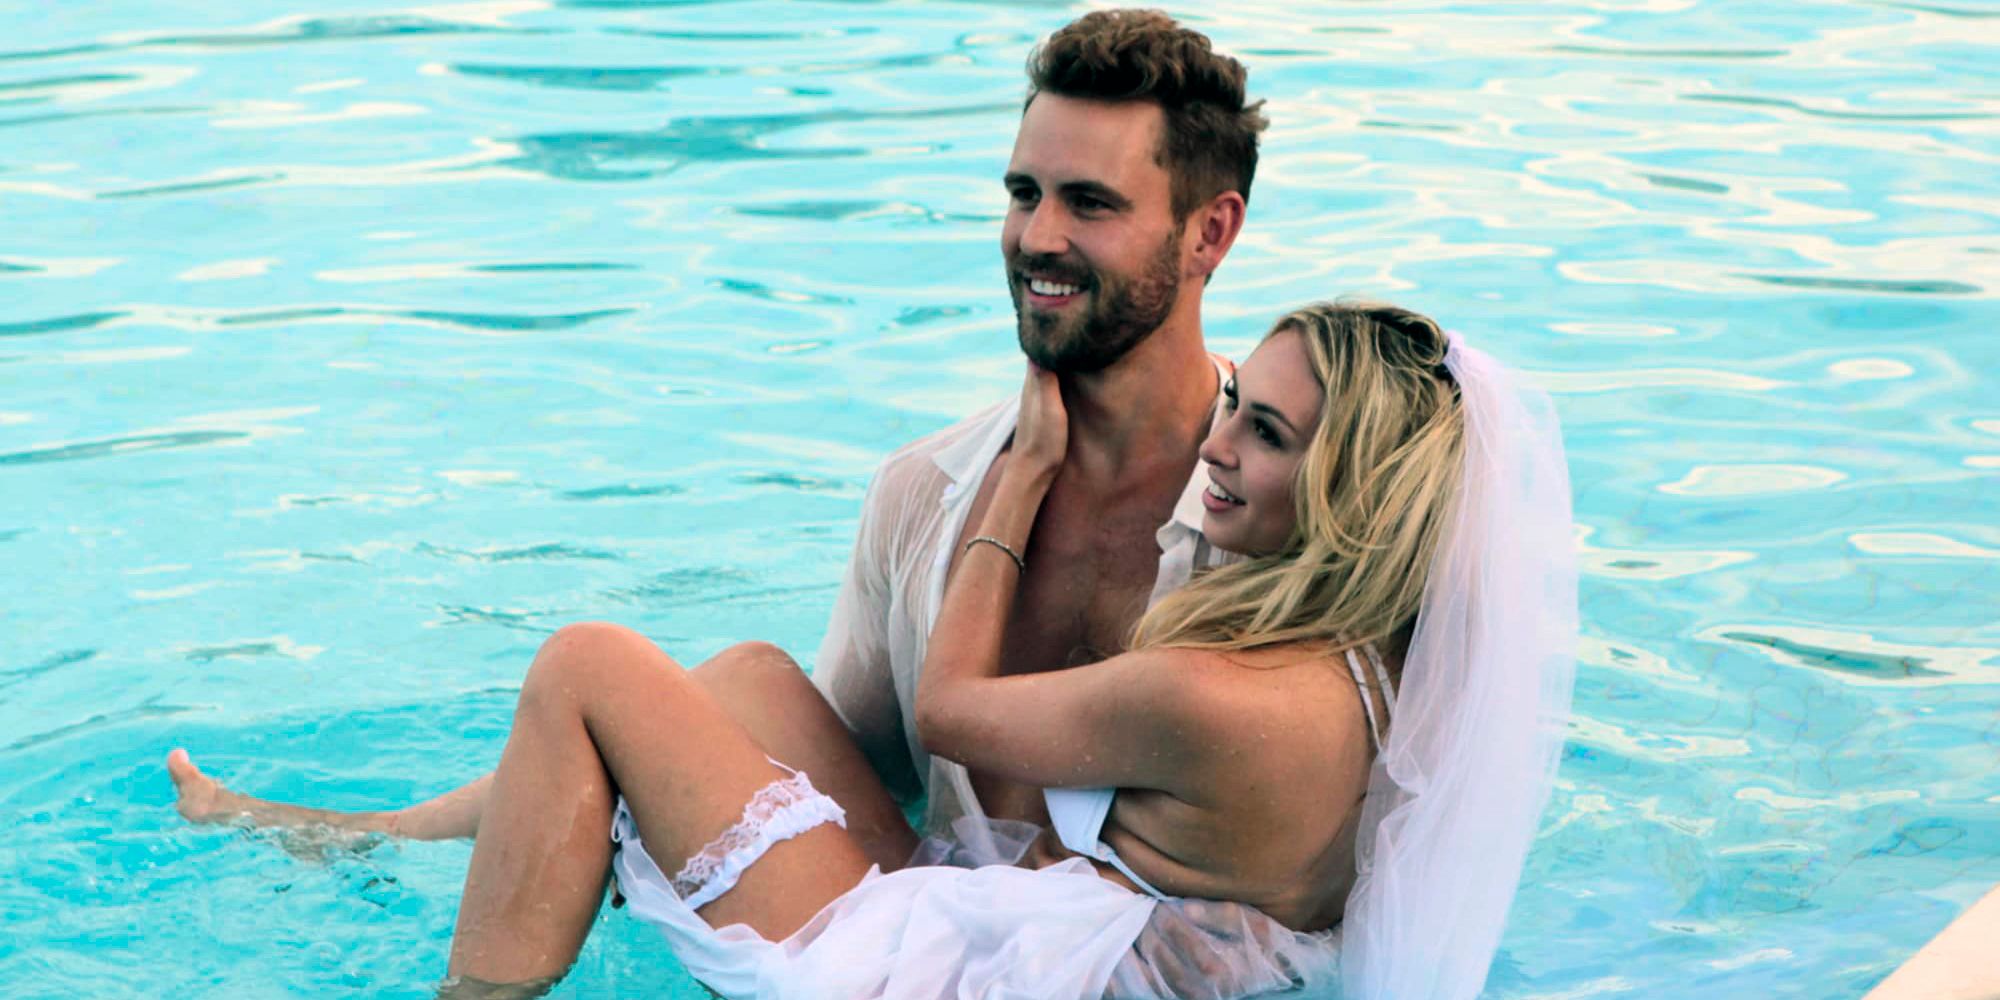 Corinne Olympios is the contestant that 'The Bachelor' fans love to hate